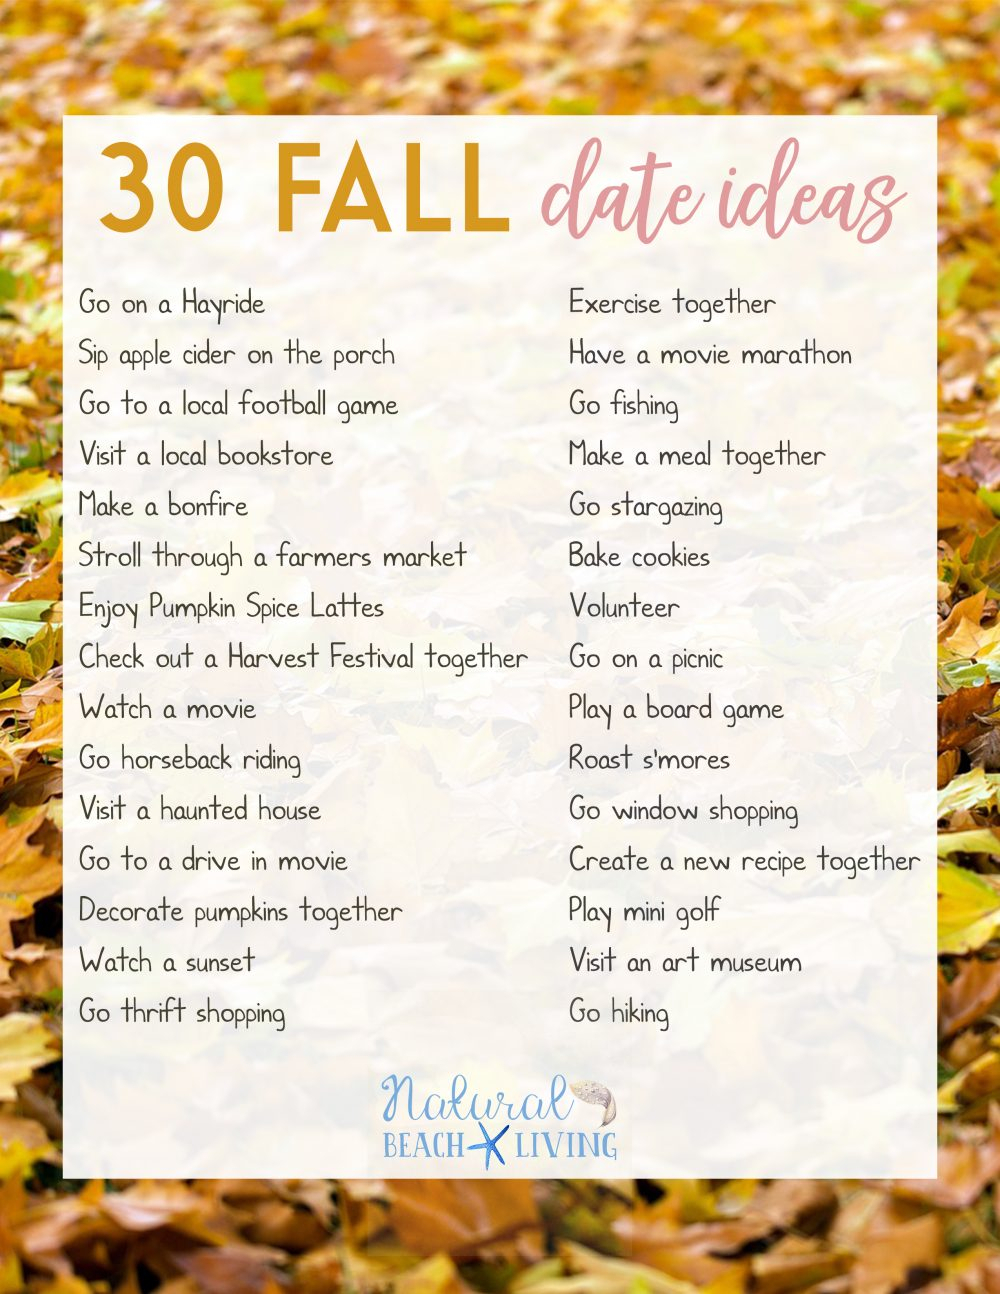 10 Awesome Ideas For A Fun Date fun date night ideas for fall natural beach living 23 2024